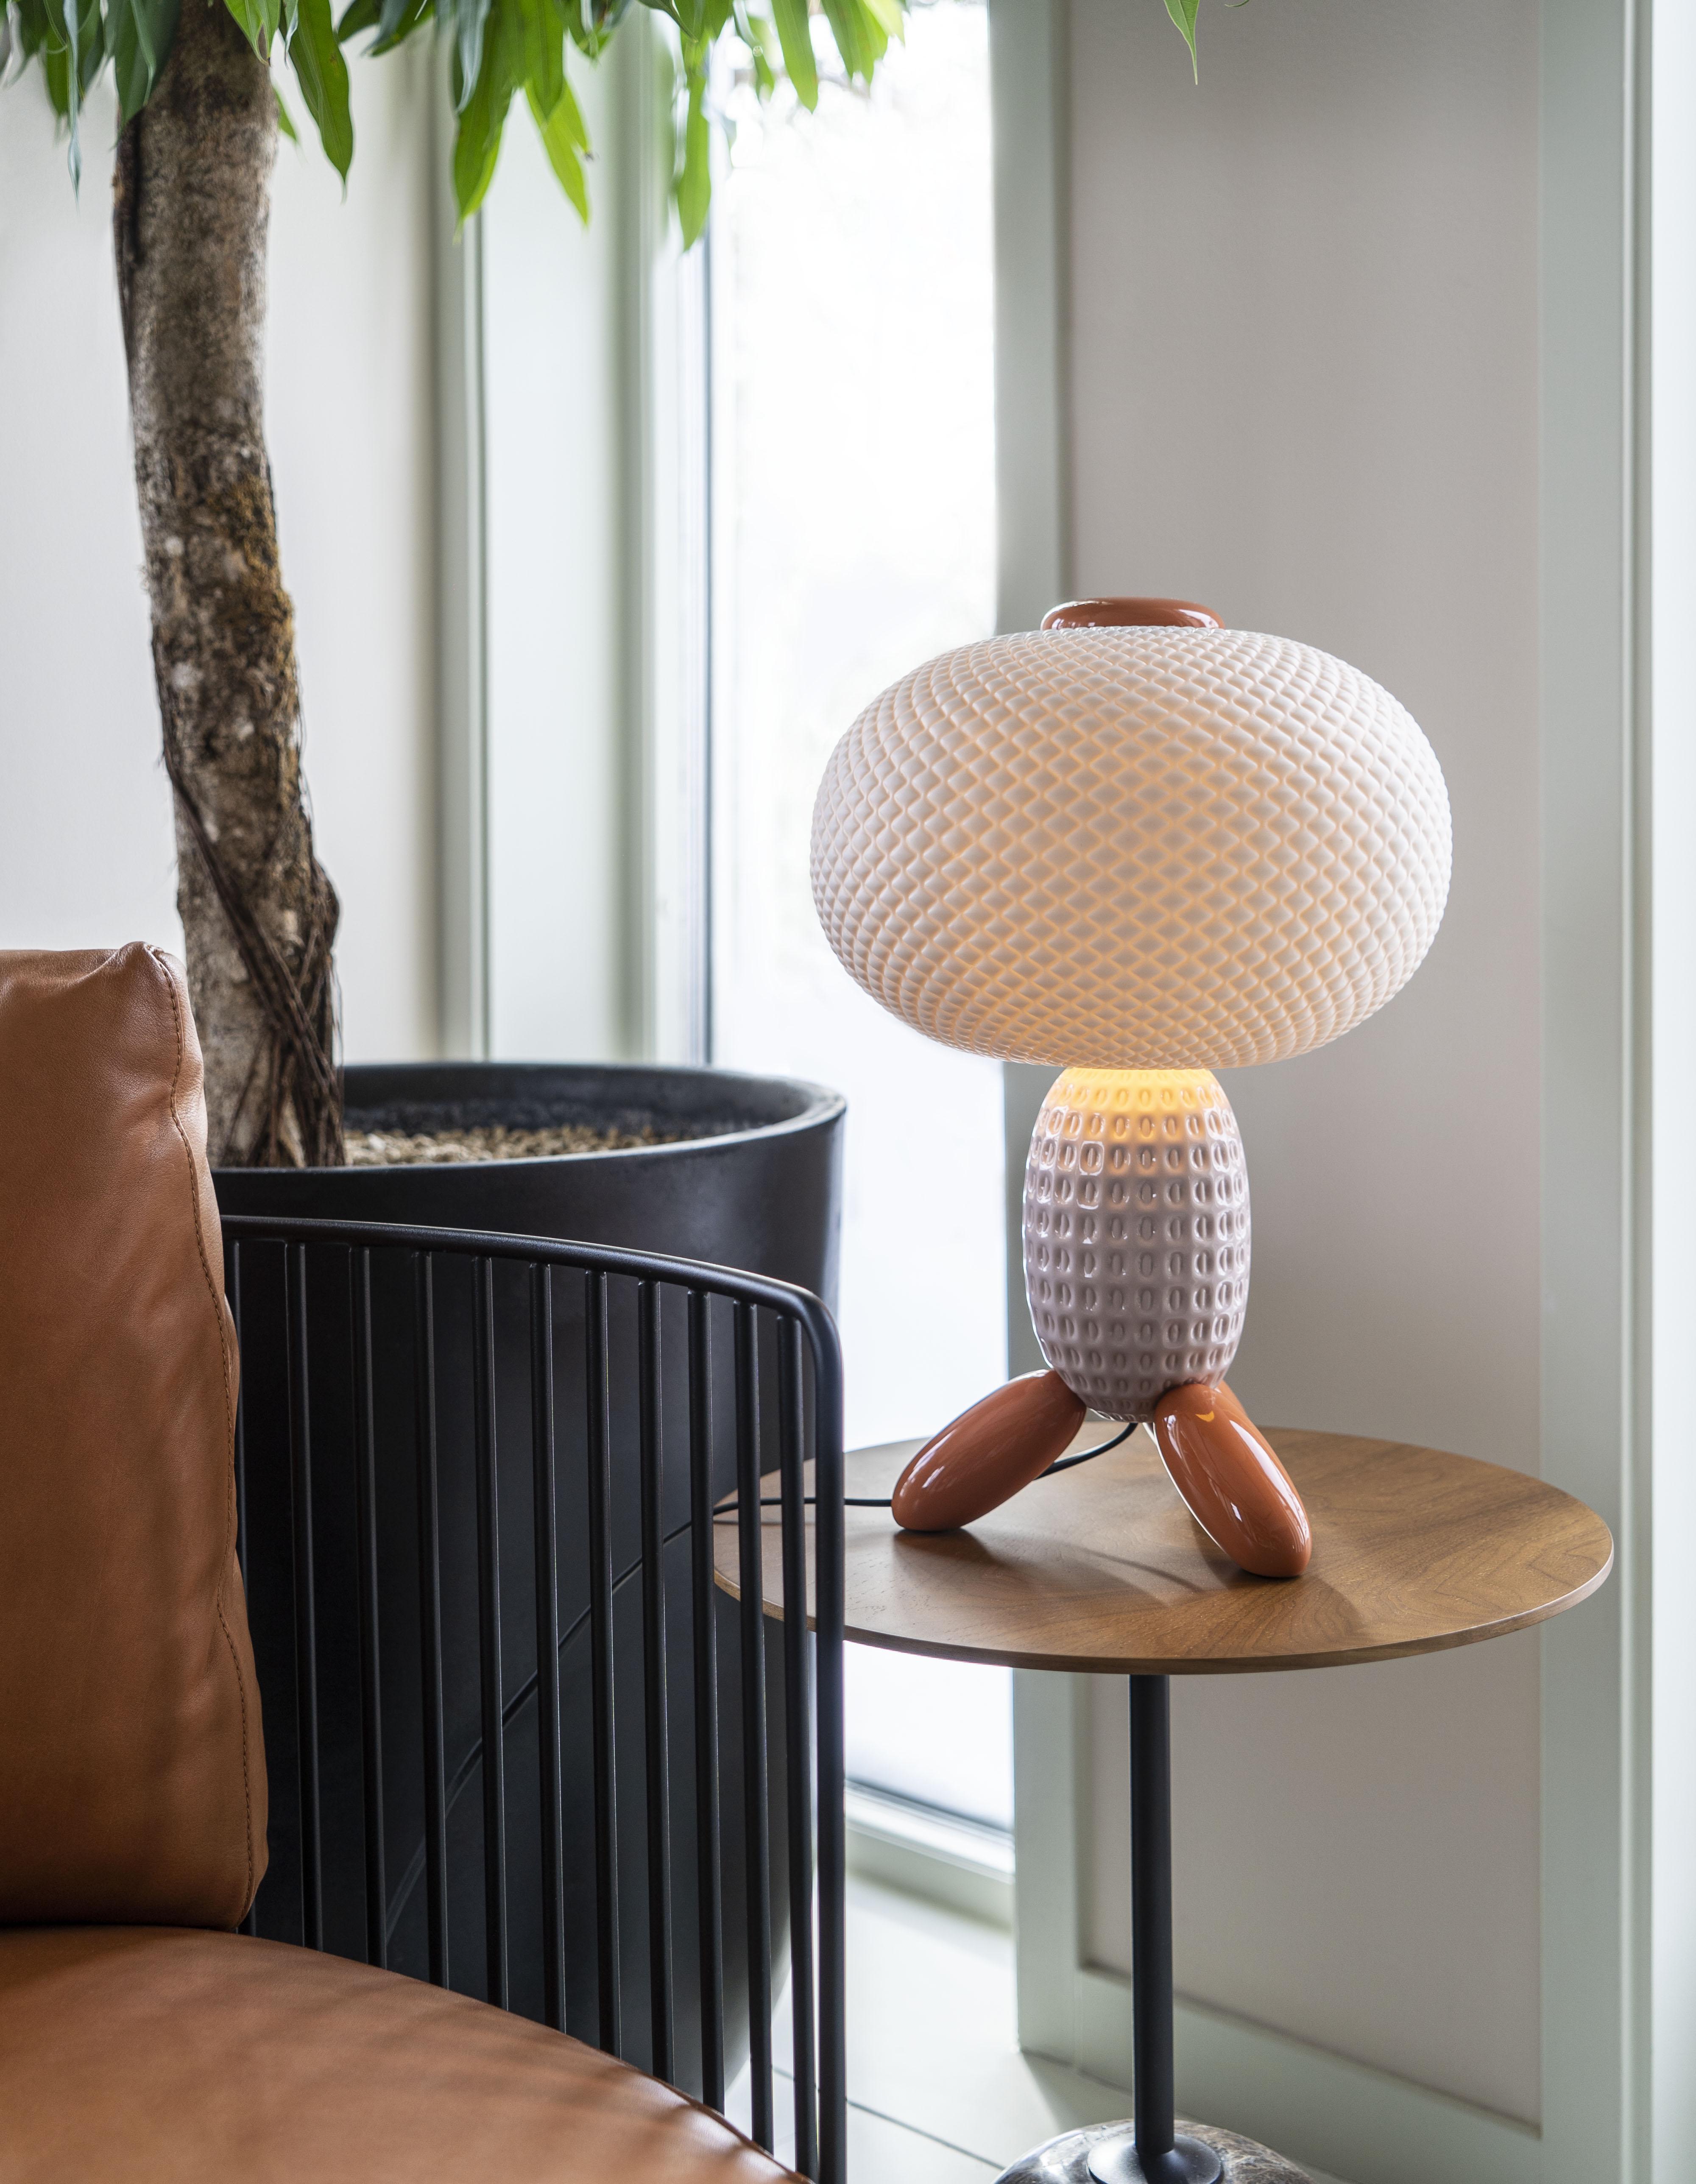 Porcelain table lamp from the Soft Blown collection, designed for Lladró by Luca Nichetto. This porcelain table lamp from the Soft Blown collection is one of the first designs made for Lladró by Nichetto Studio, the prestigious Stockholm-based